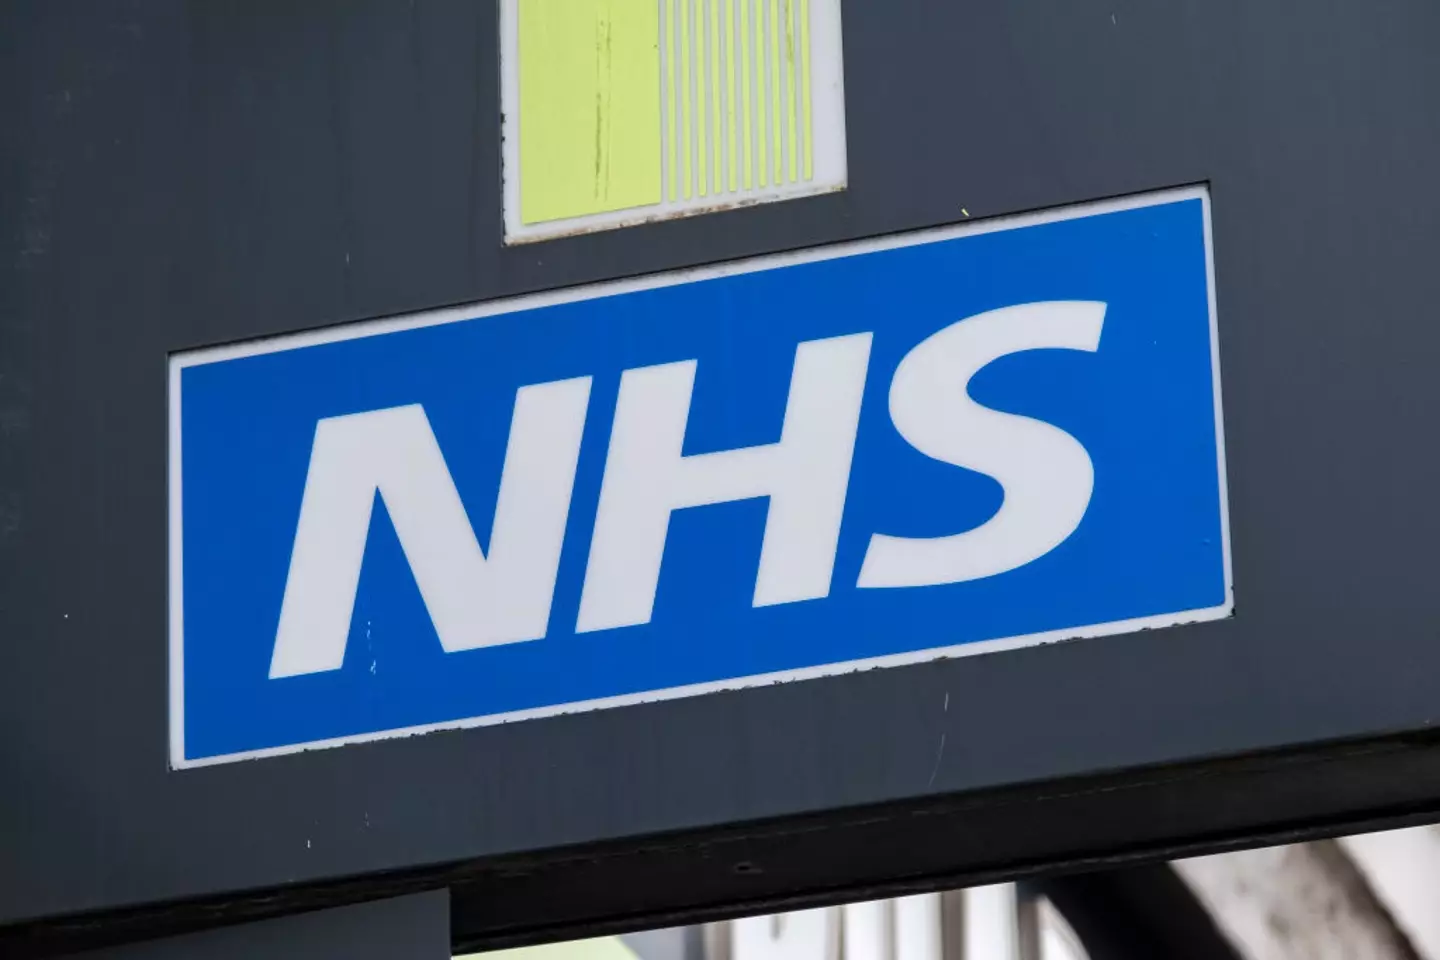 The NHS has shared its official advice on the 'extremely serious' disease. (Mike Kemp / Contributor / Getty Images)